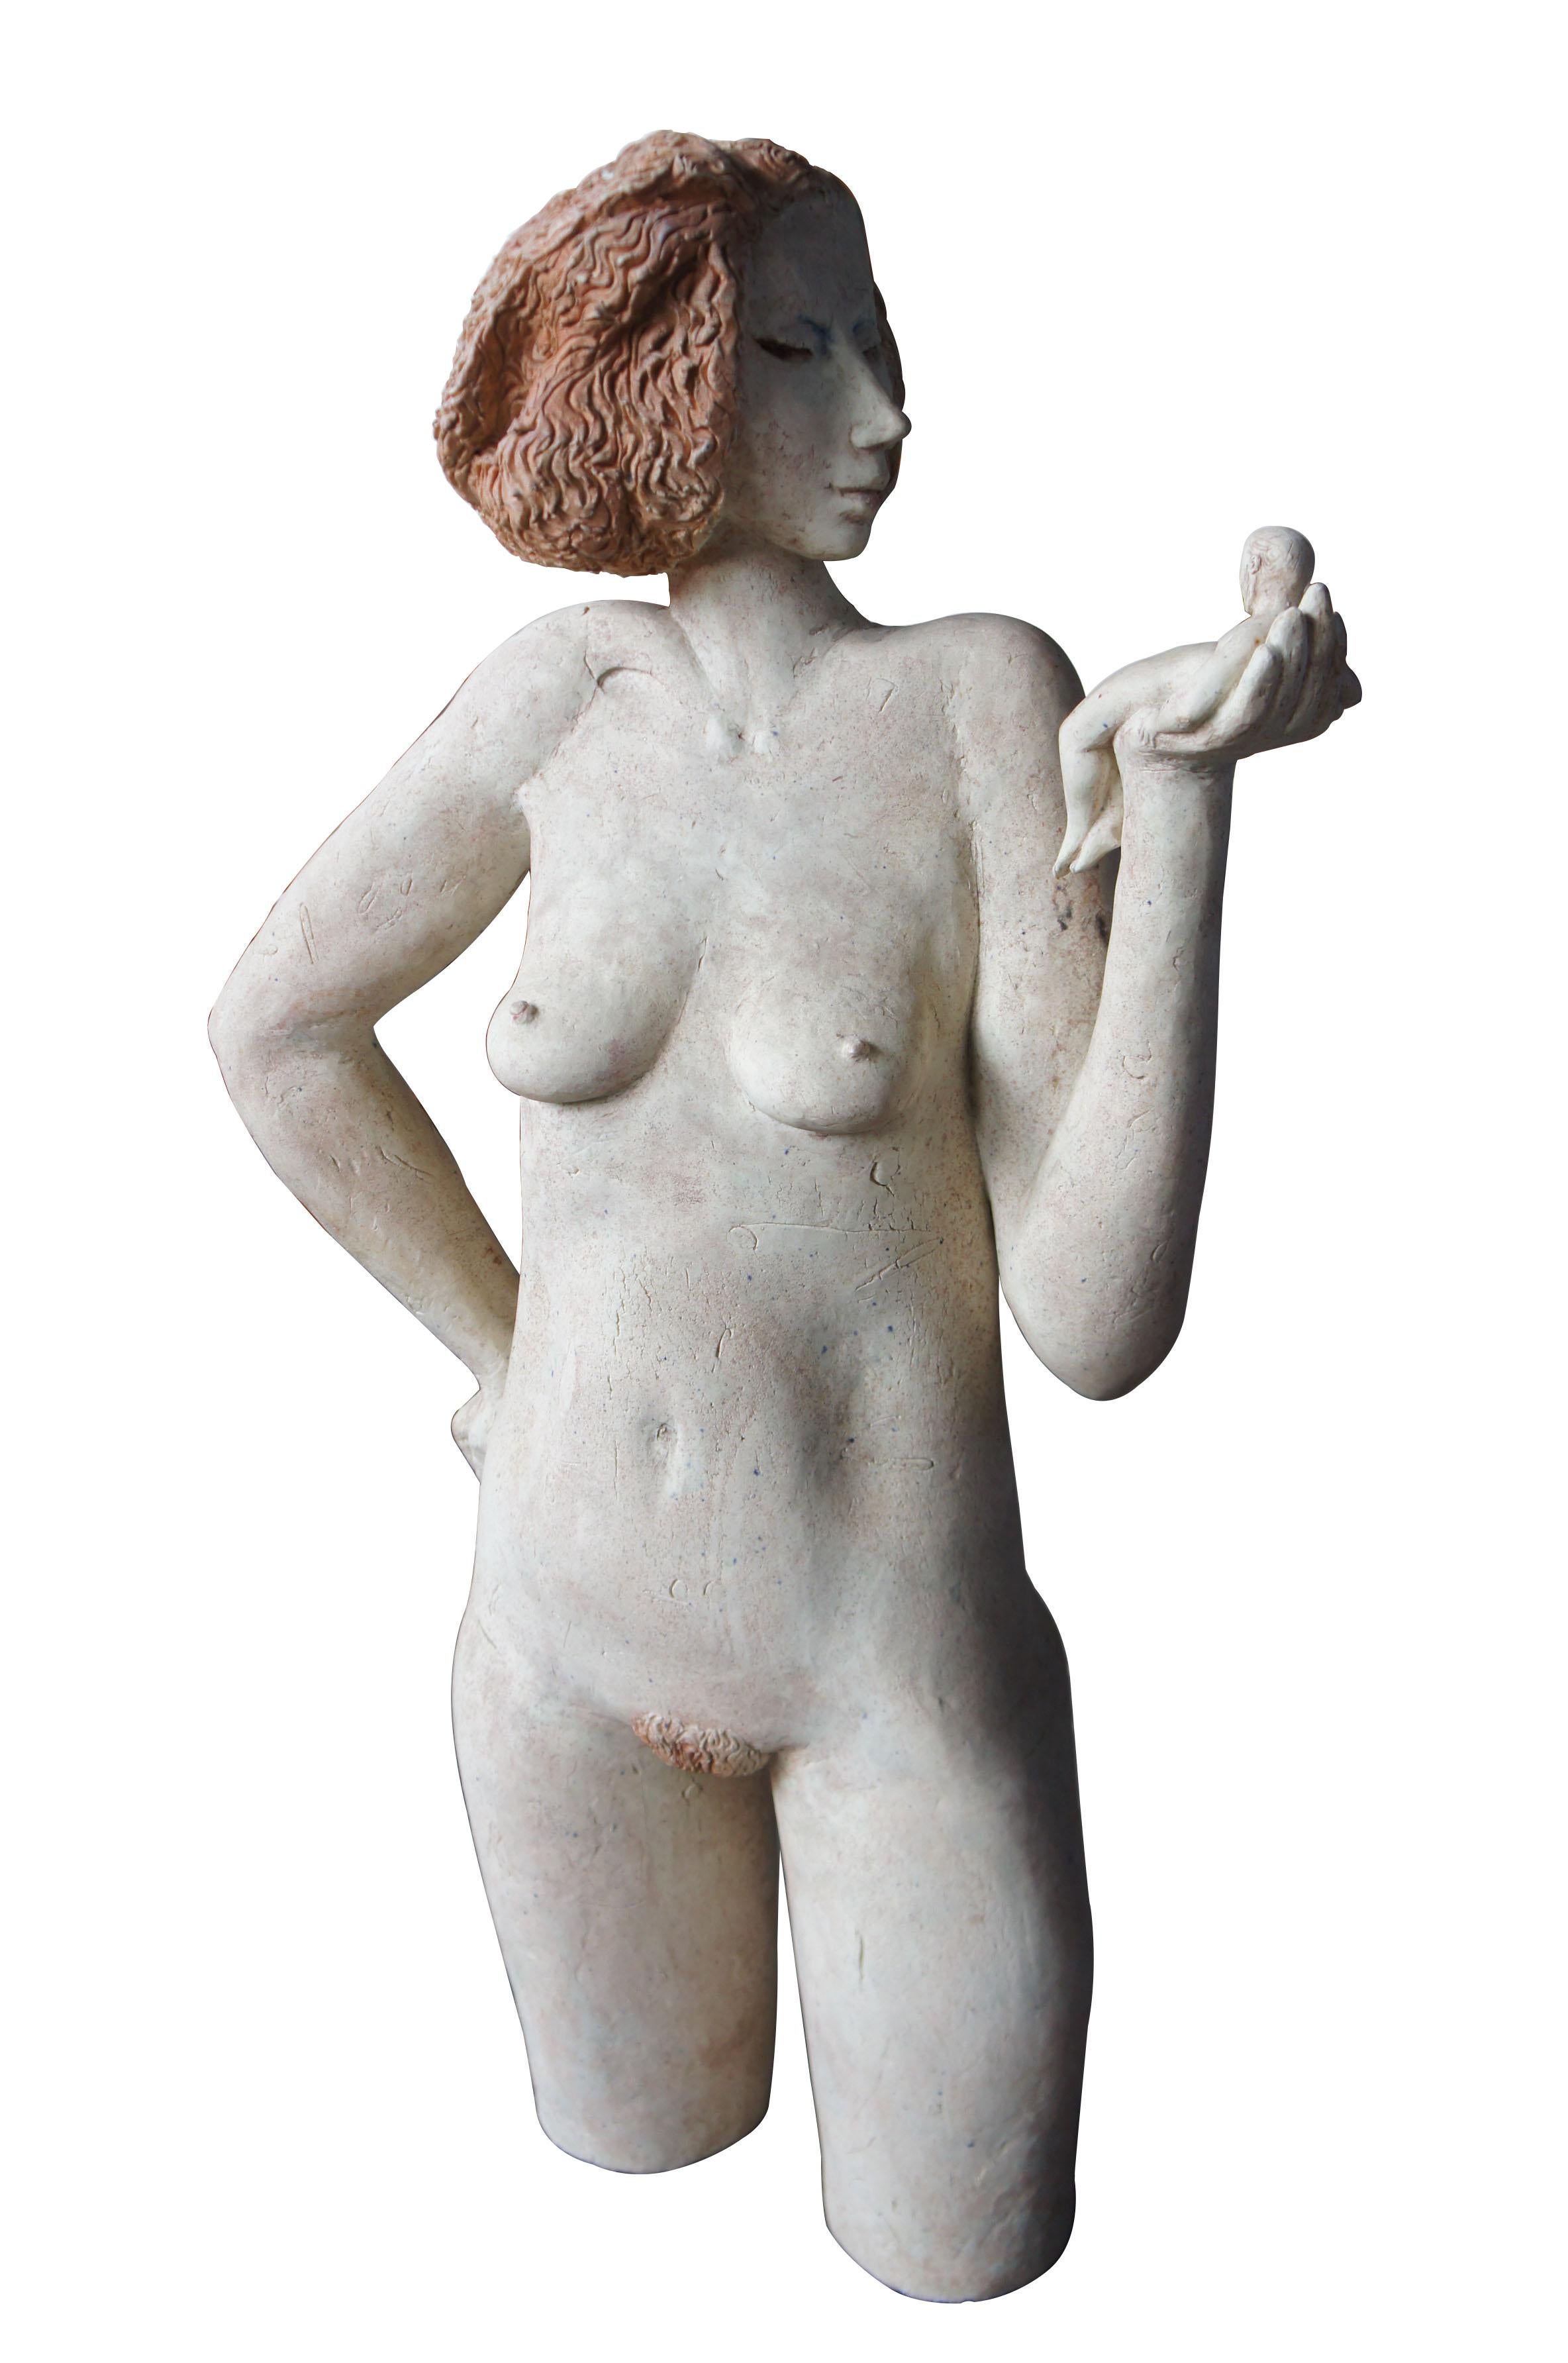 Surrealist modern nude female ceramic sculpture miniature male feminist statue

Up for consideration is an exquisite ceramic sculpture. Features a nude woman with reddish hair. One arm is resting upon her hip, while the other is outstretched